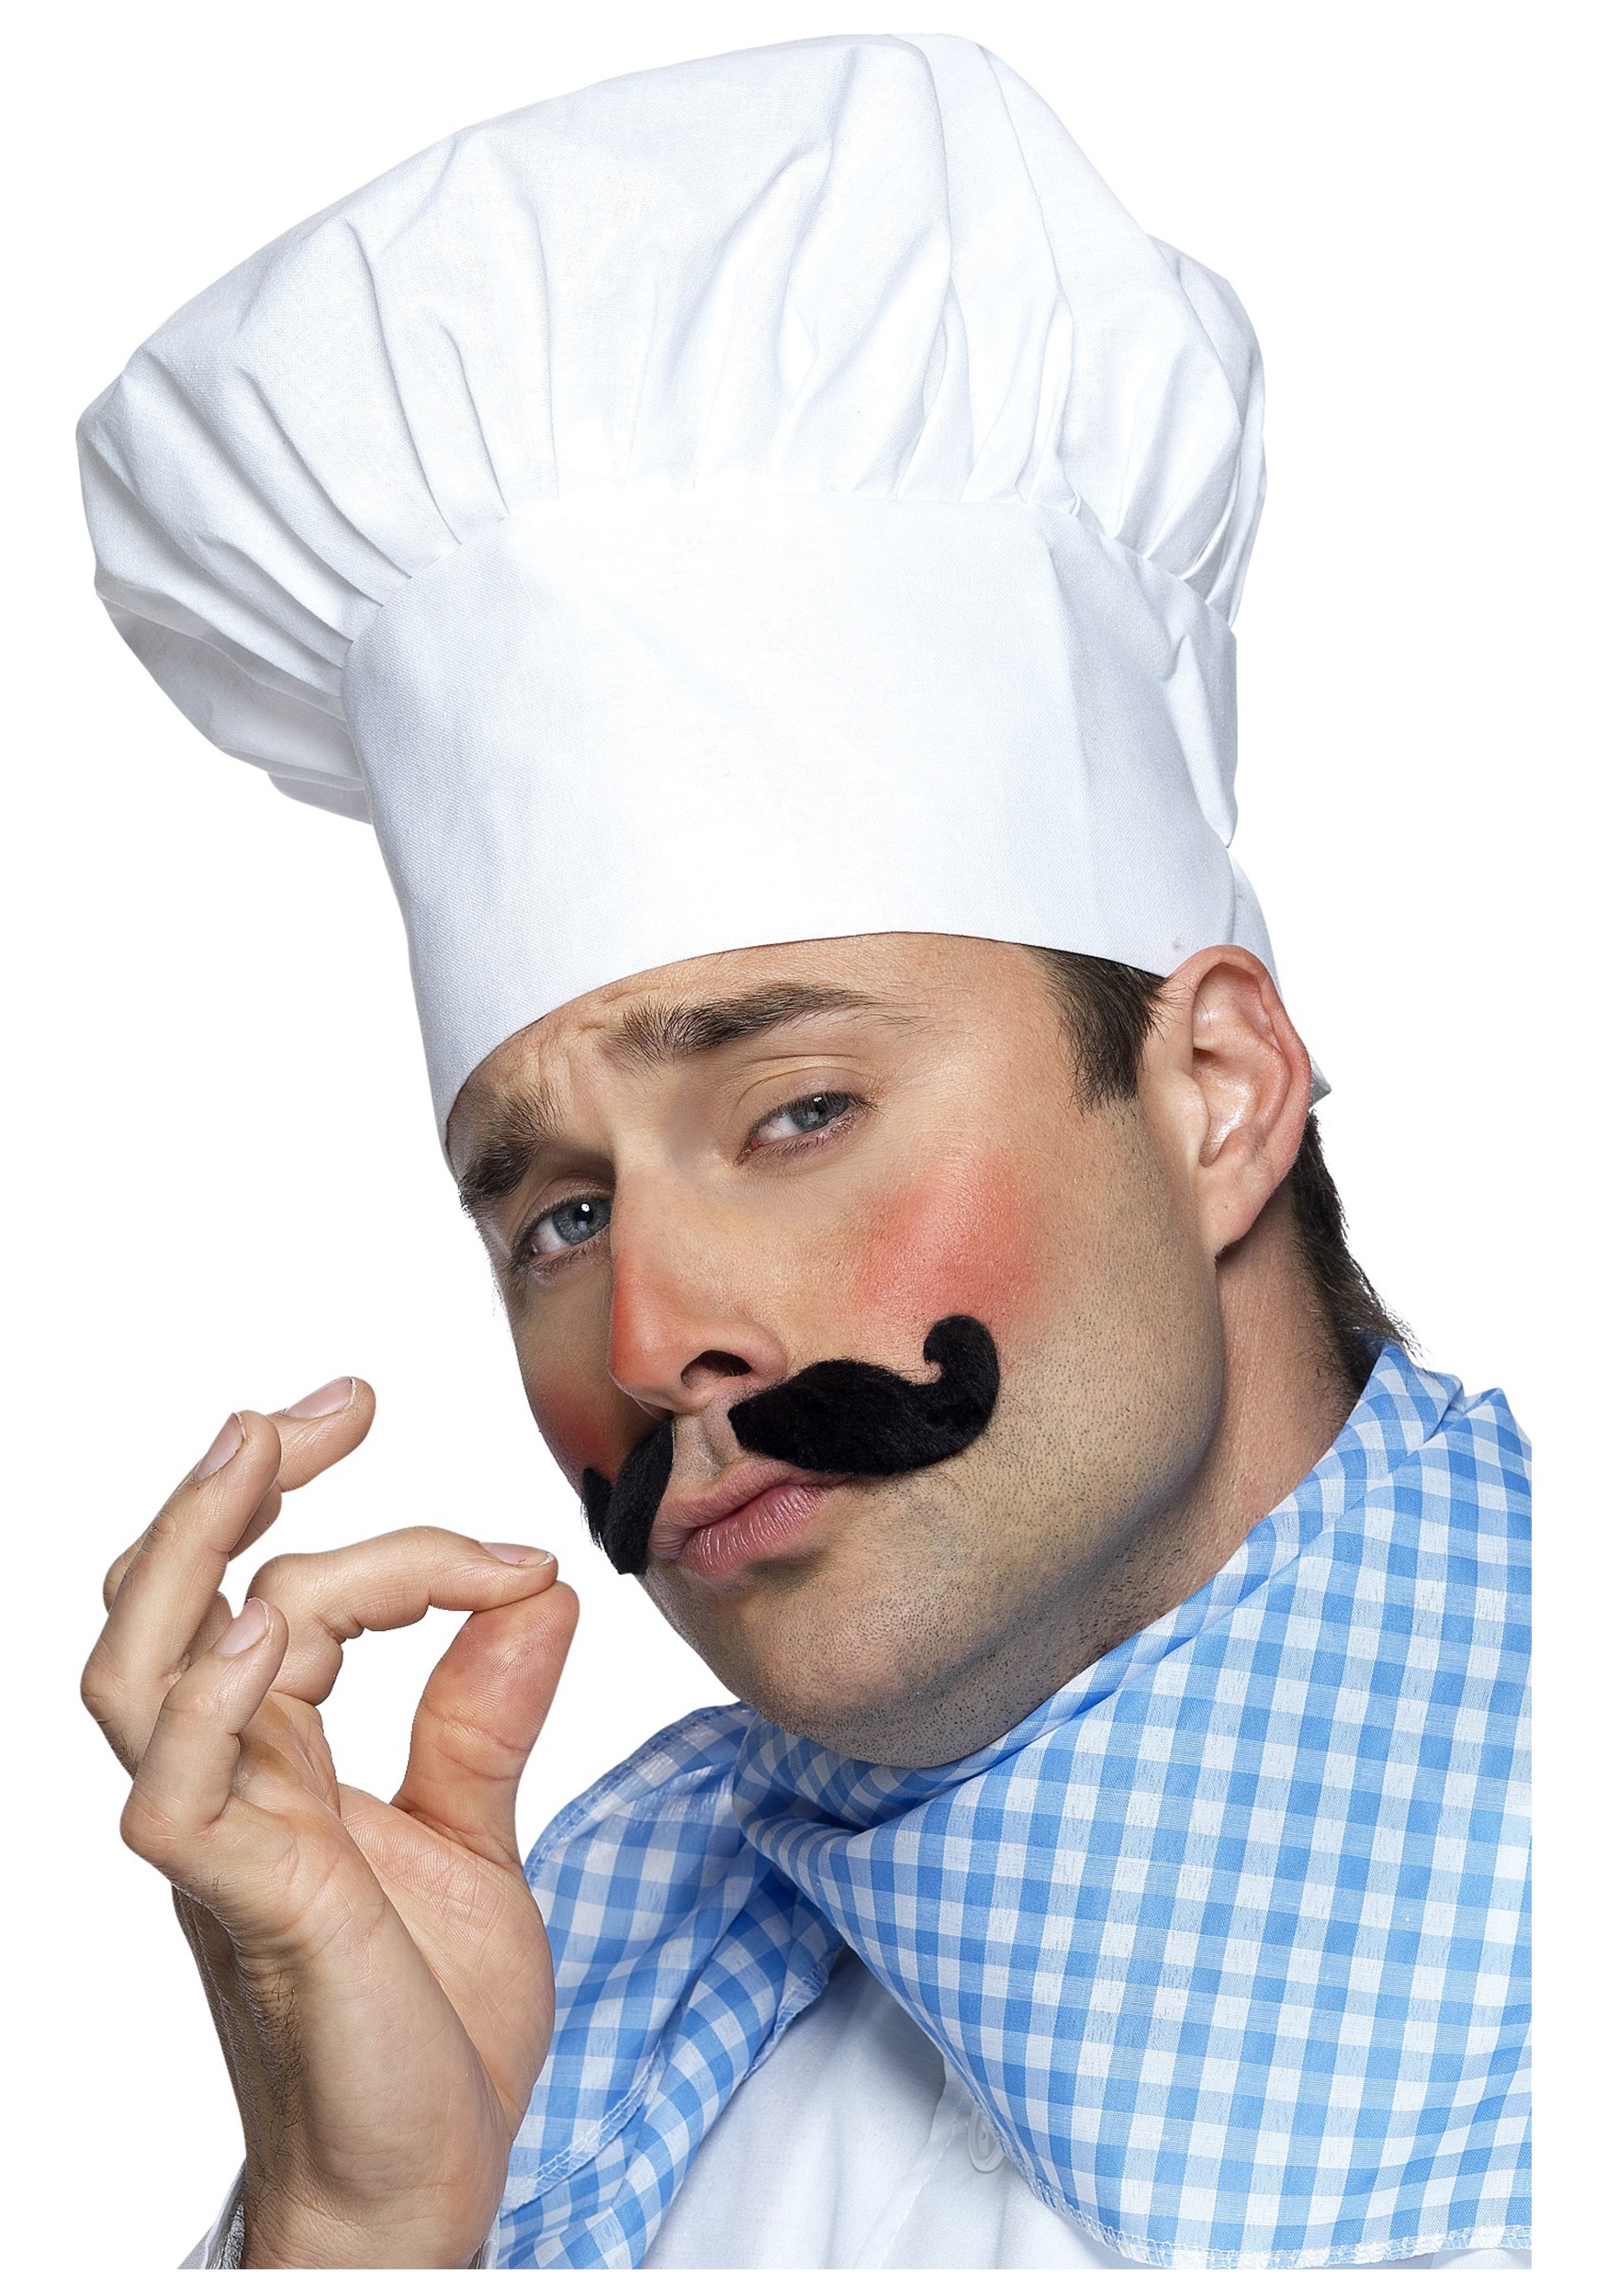 https://images.halloweencostumes.com/products/25012/1-1/chef-hat.jpg